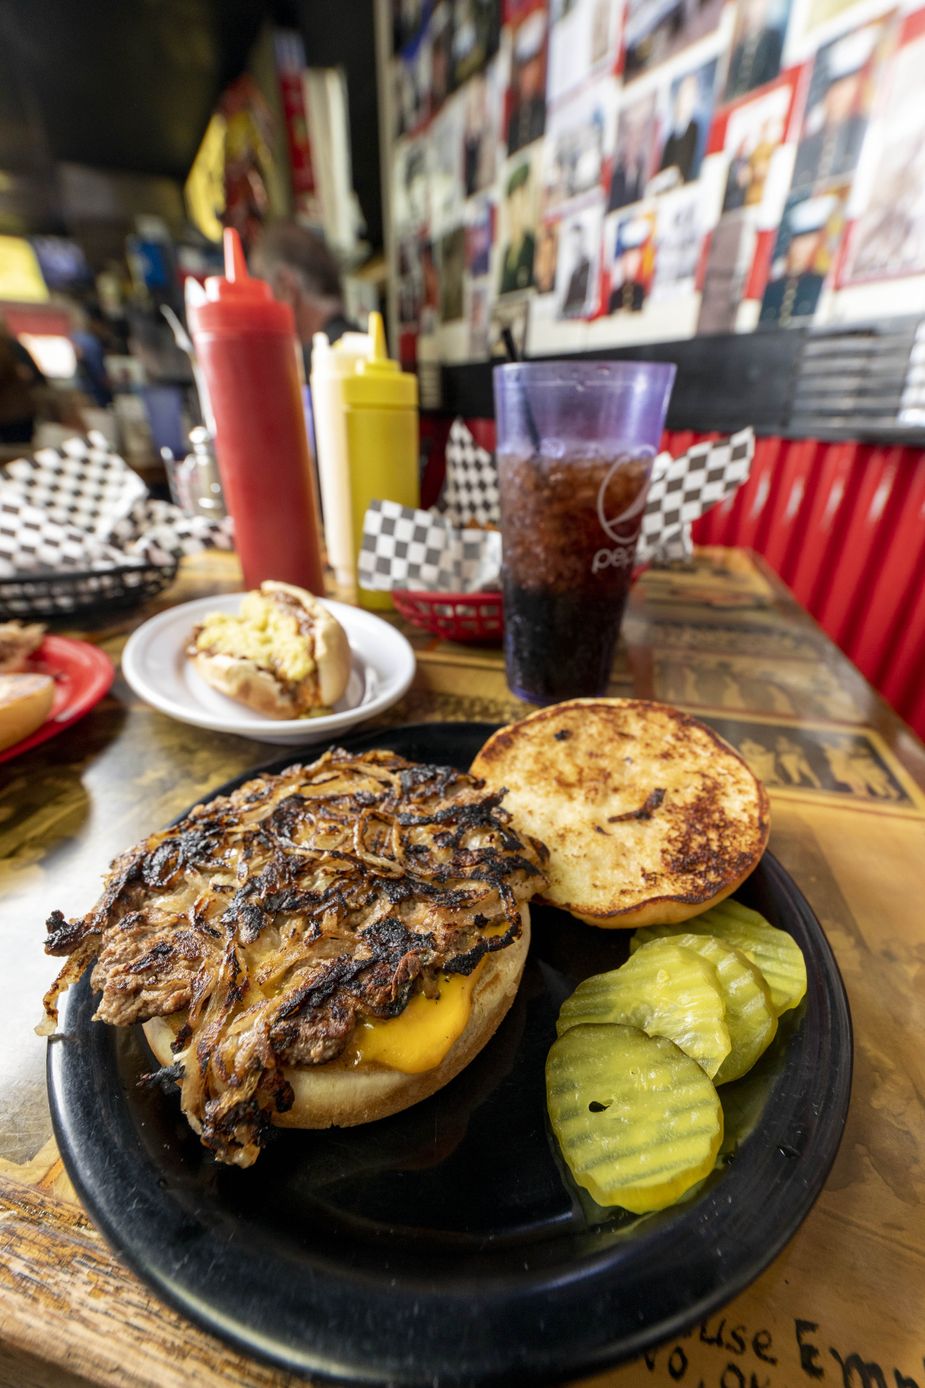 Located on Route 66, Sid’s Diner in El Reno is a cozy place to dig into some of the state’s best onion burgers, chili-covered coneys, crisp fries and tots, and tasty shakes. Photo by Lori Duckworth